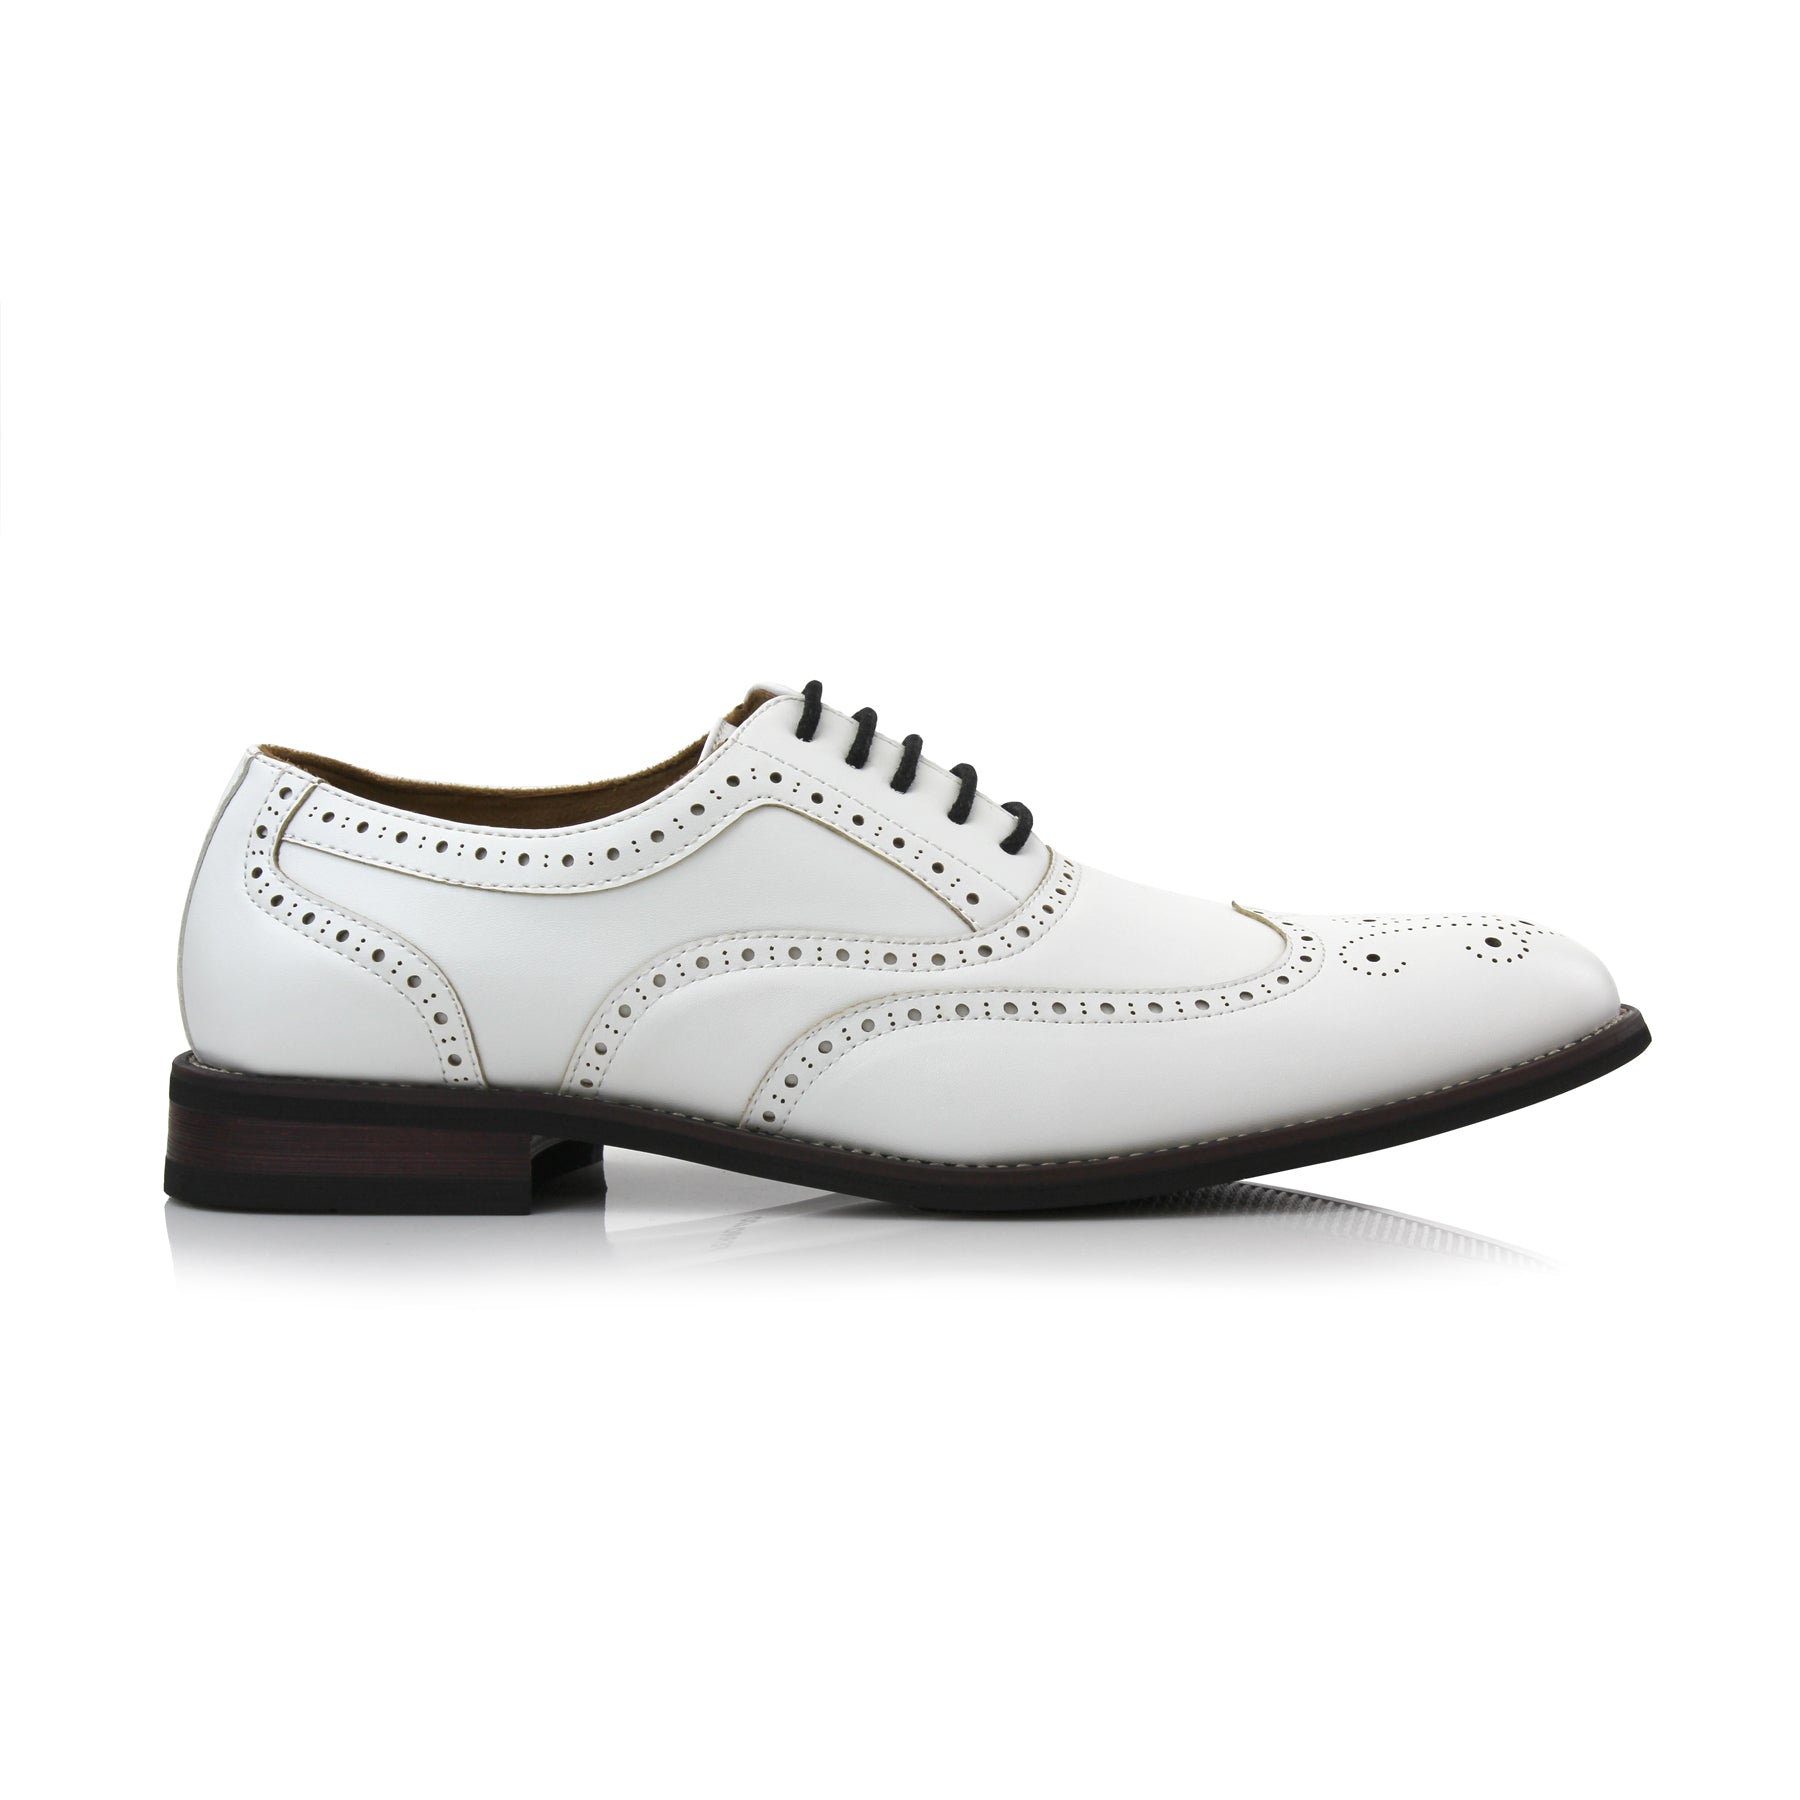 Brogue Wingtip Oxfords | Arthur by Ferro Aldo | Conal Footwear | Outer Side Angle View